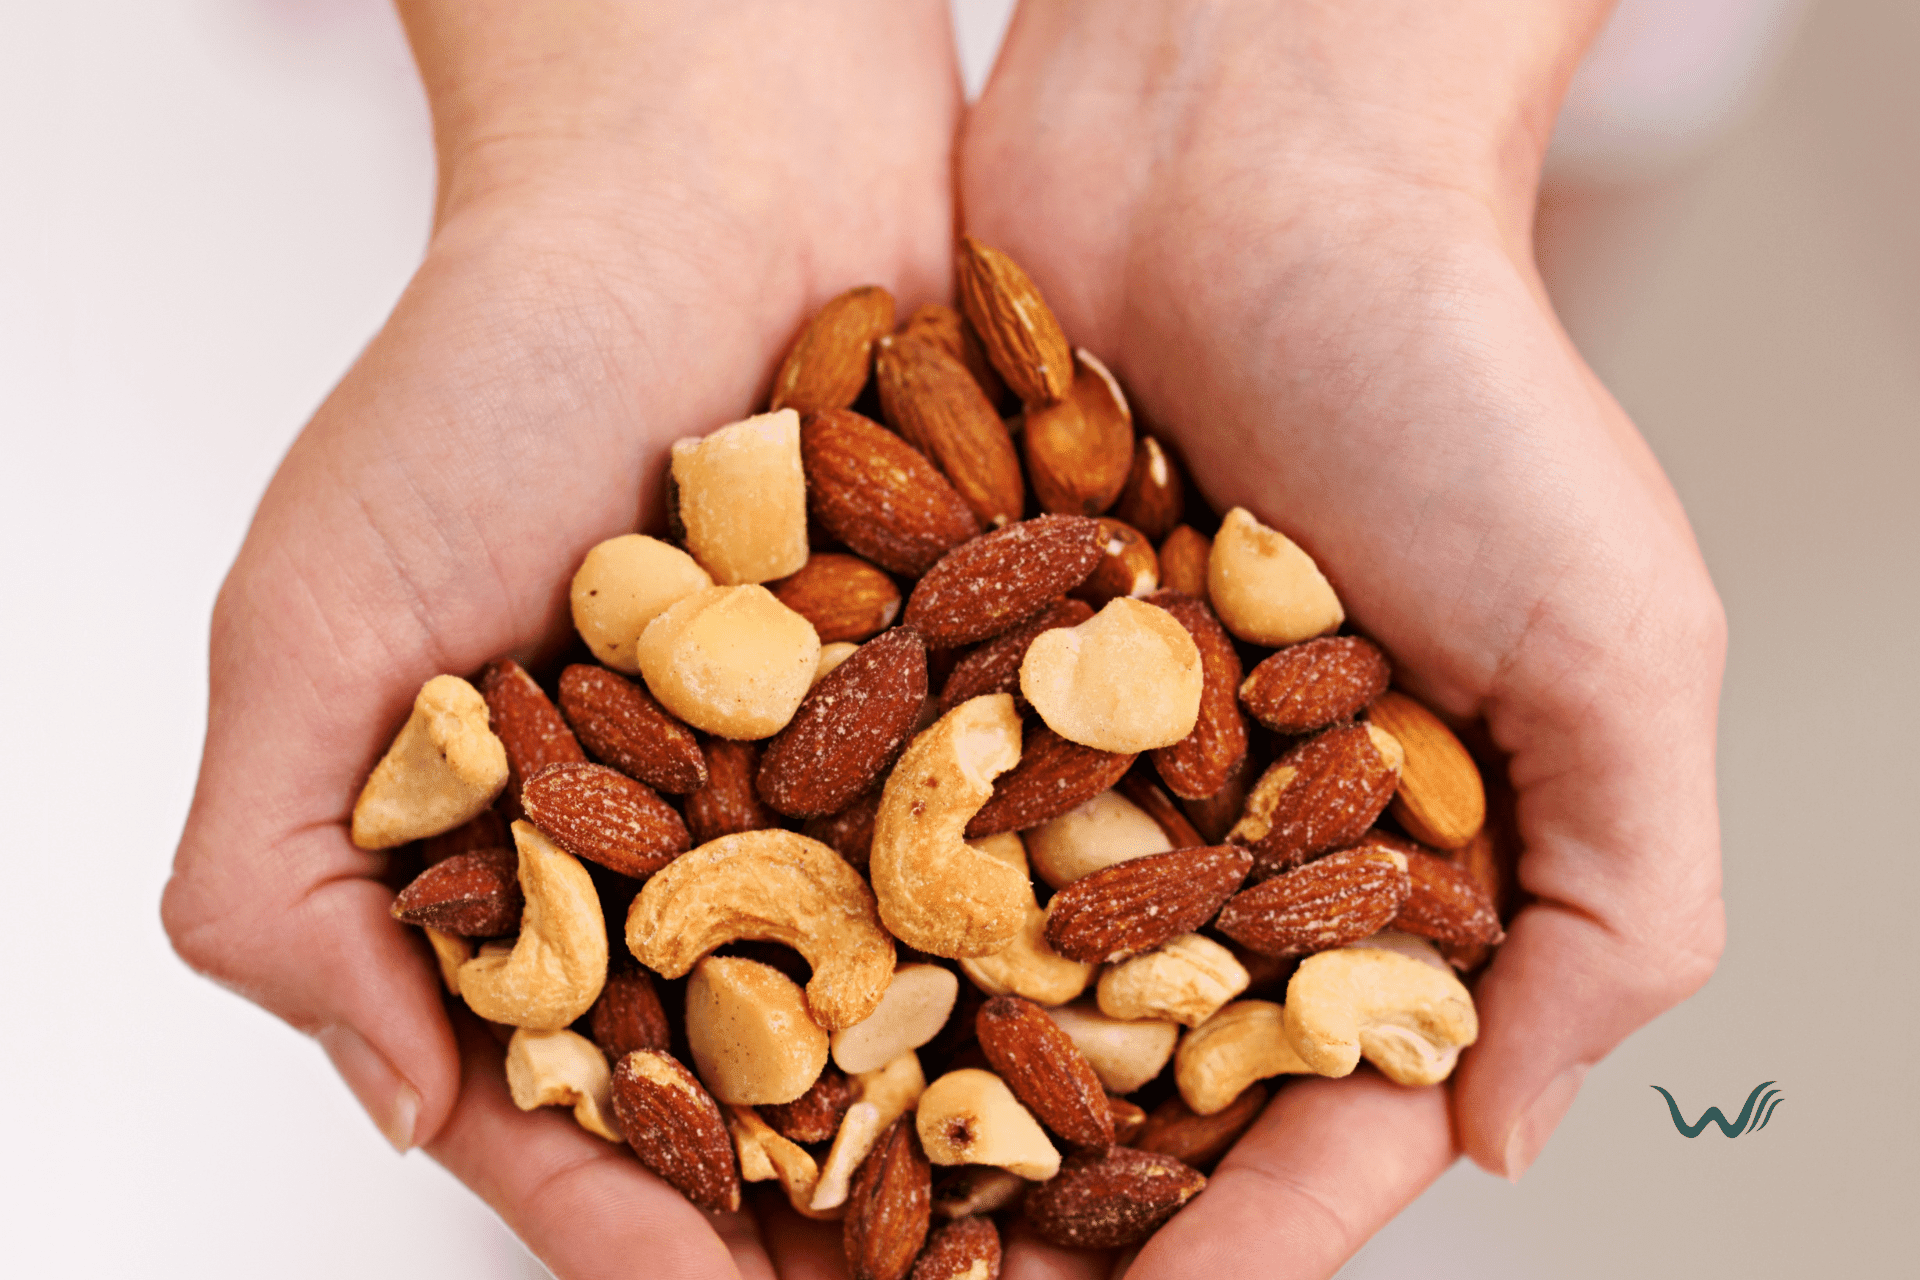 7 nuts your dog can safely eat